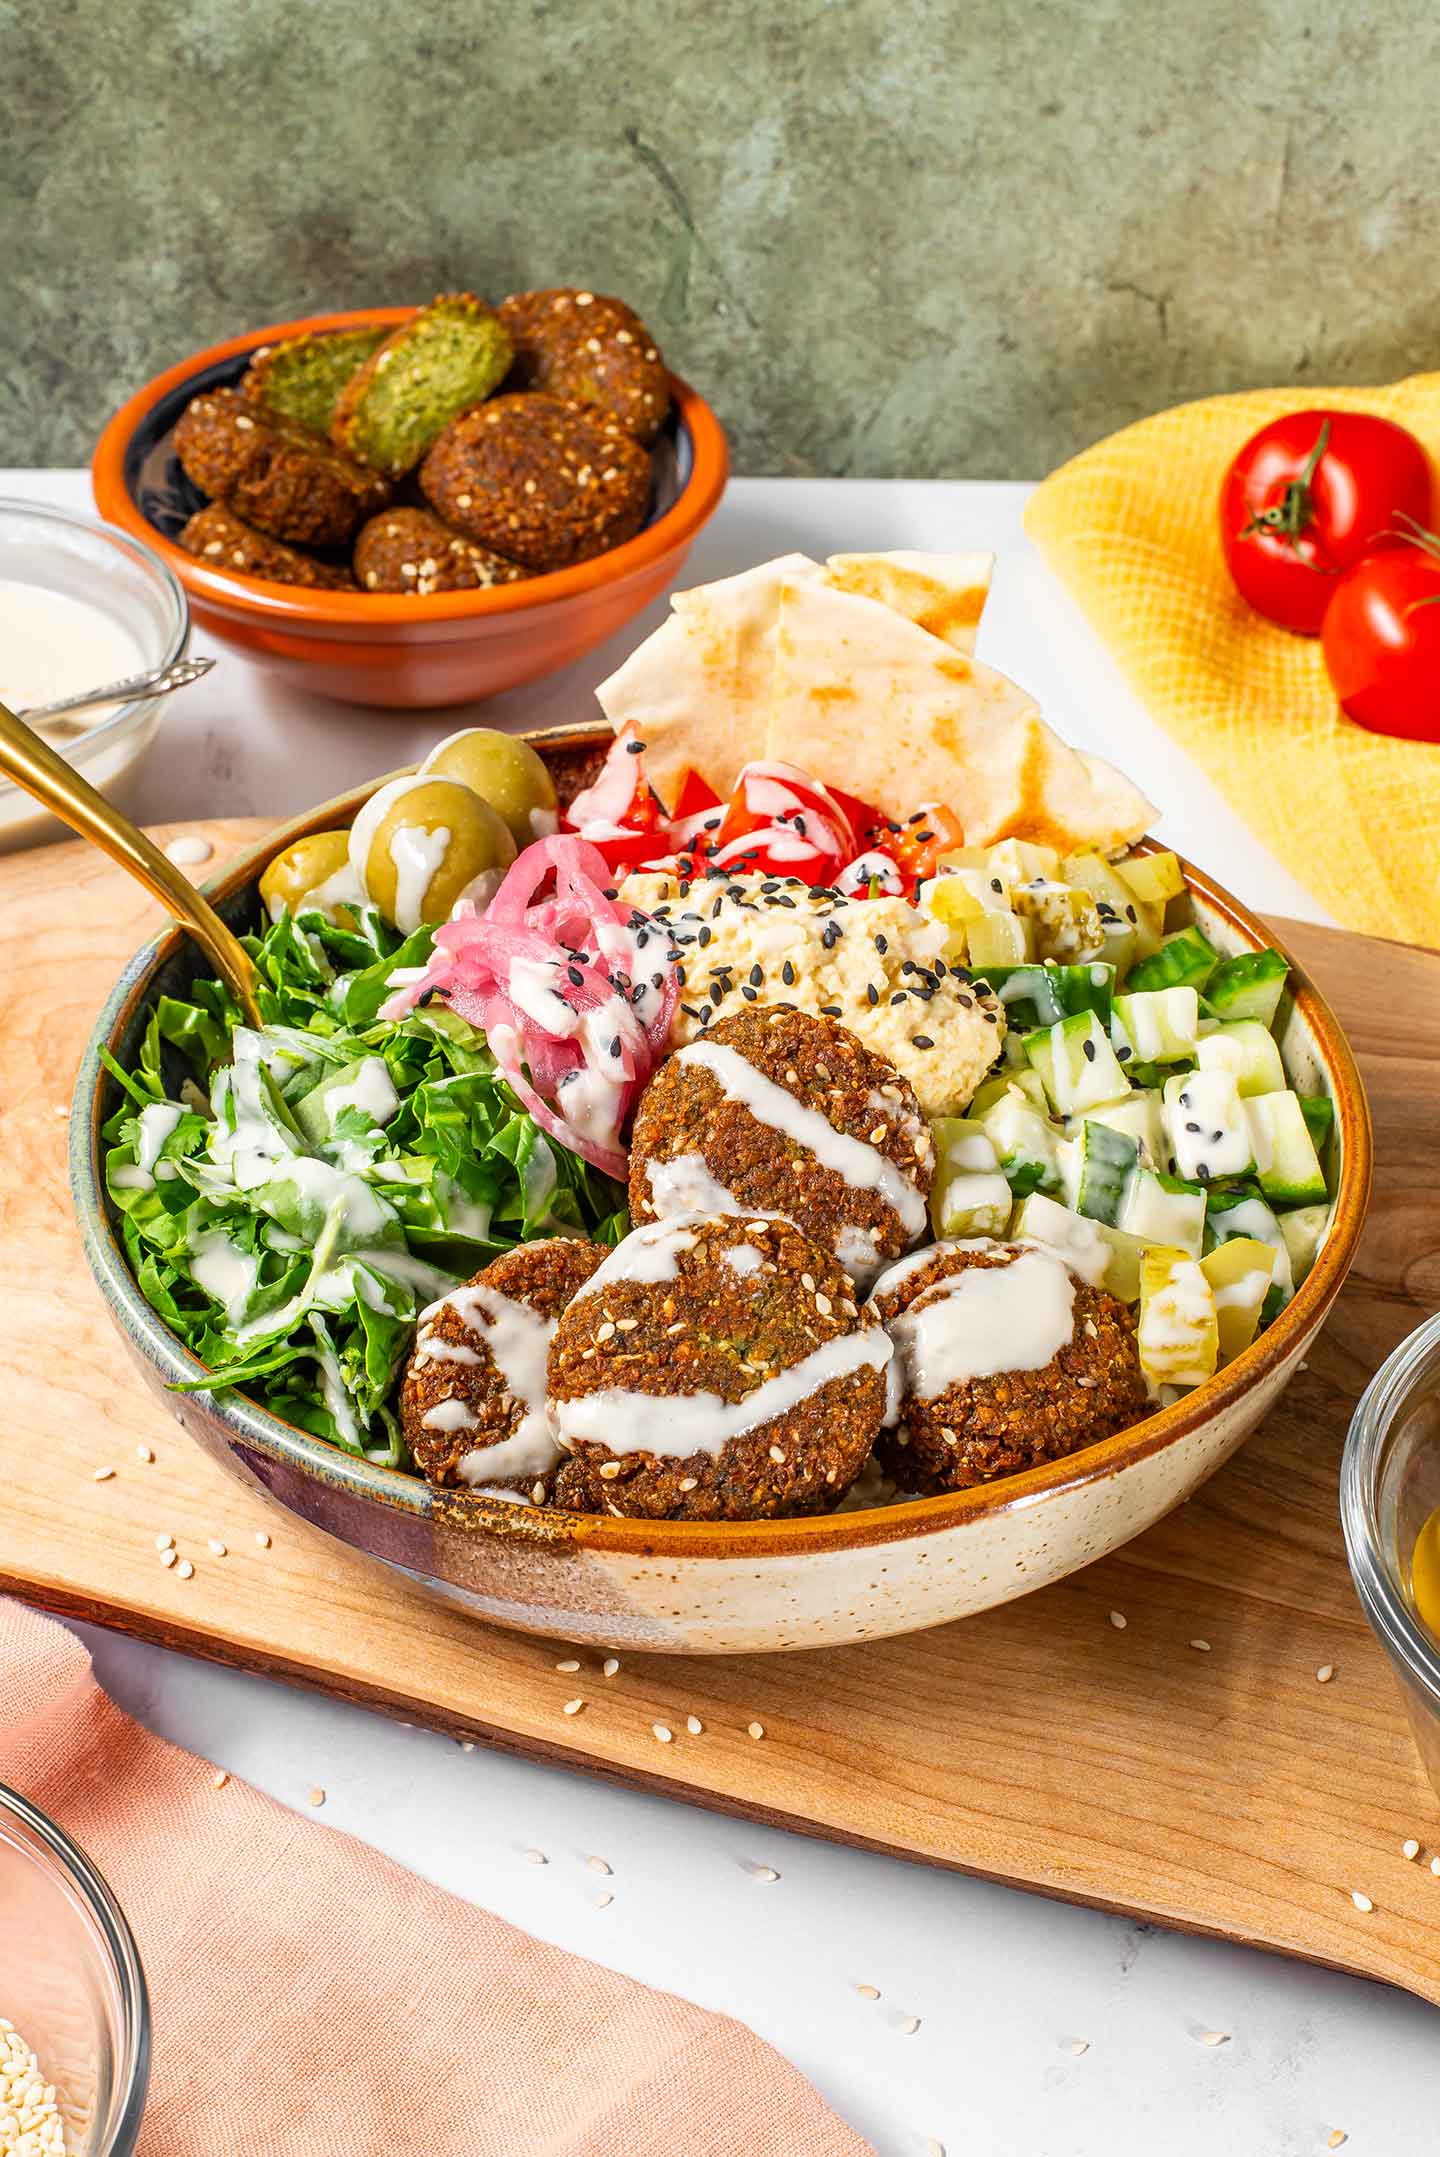 A colourful falafel bowl consisting of crispy fried falafel, cucumber, tomato, greens, olives, pickled red onion and drizzled with a creamy tahini dressing. Toasted pita rests in the bowl and extra falafel are in the background.